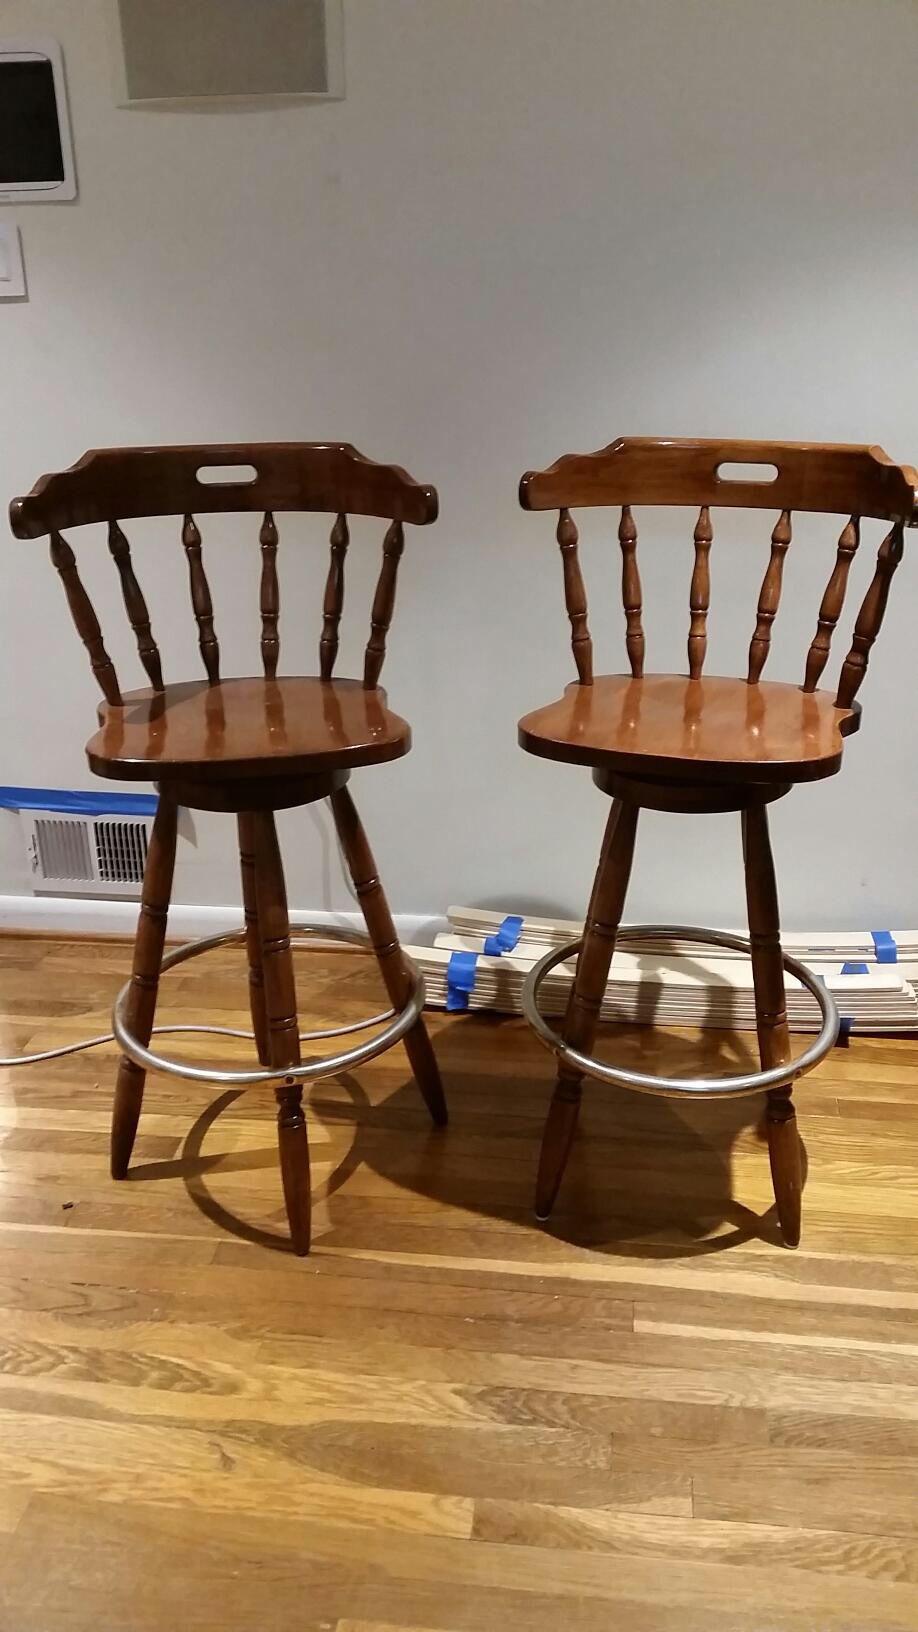 Pair of wooden Bar stools with backs